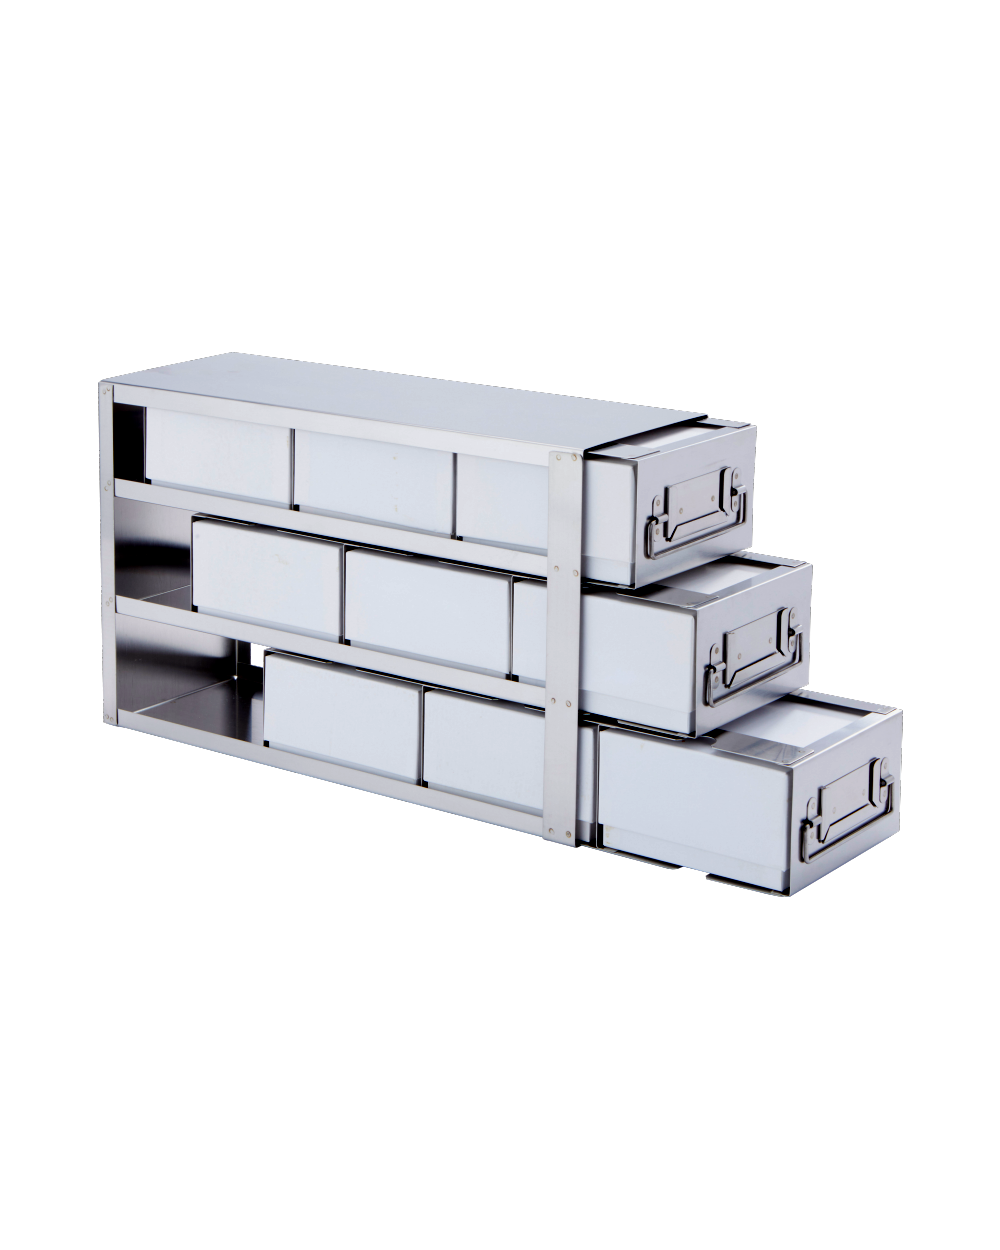 So-Low 16-1/2 x 10-1/16 x 5-1/2 - 9 slide out shelves with 3” cardboard boxes